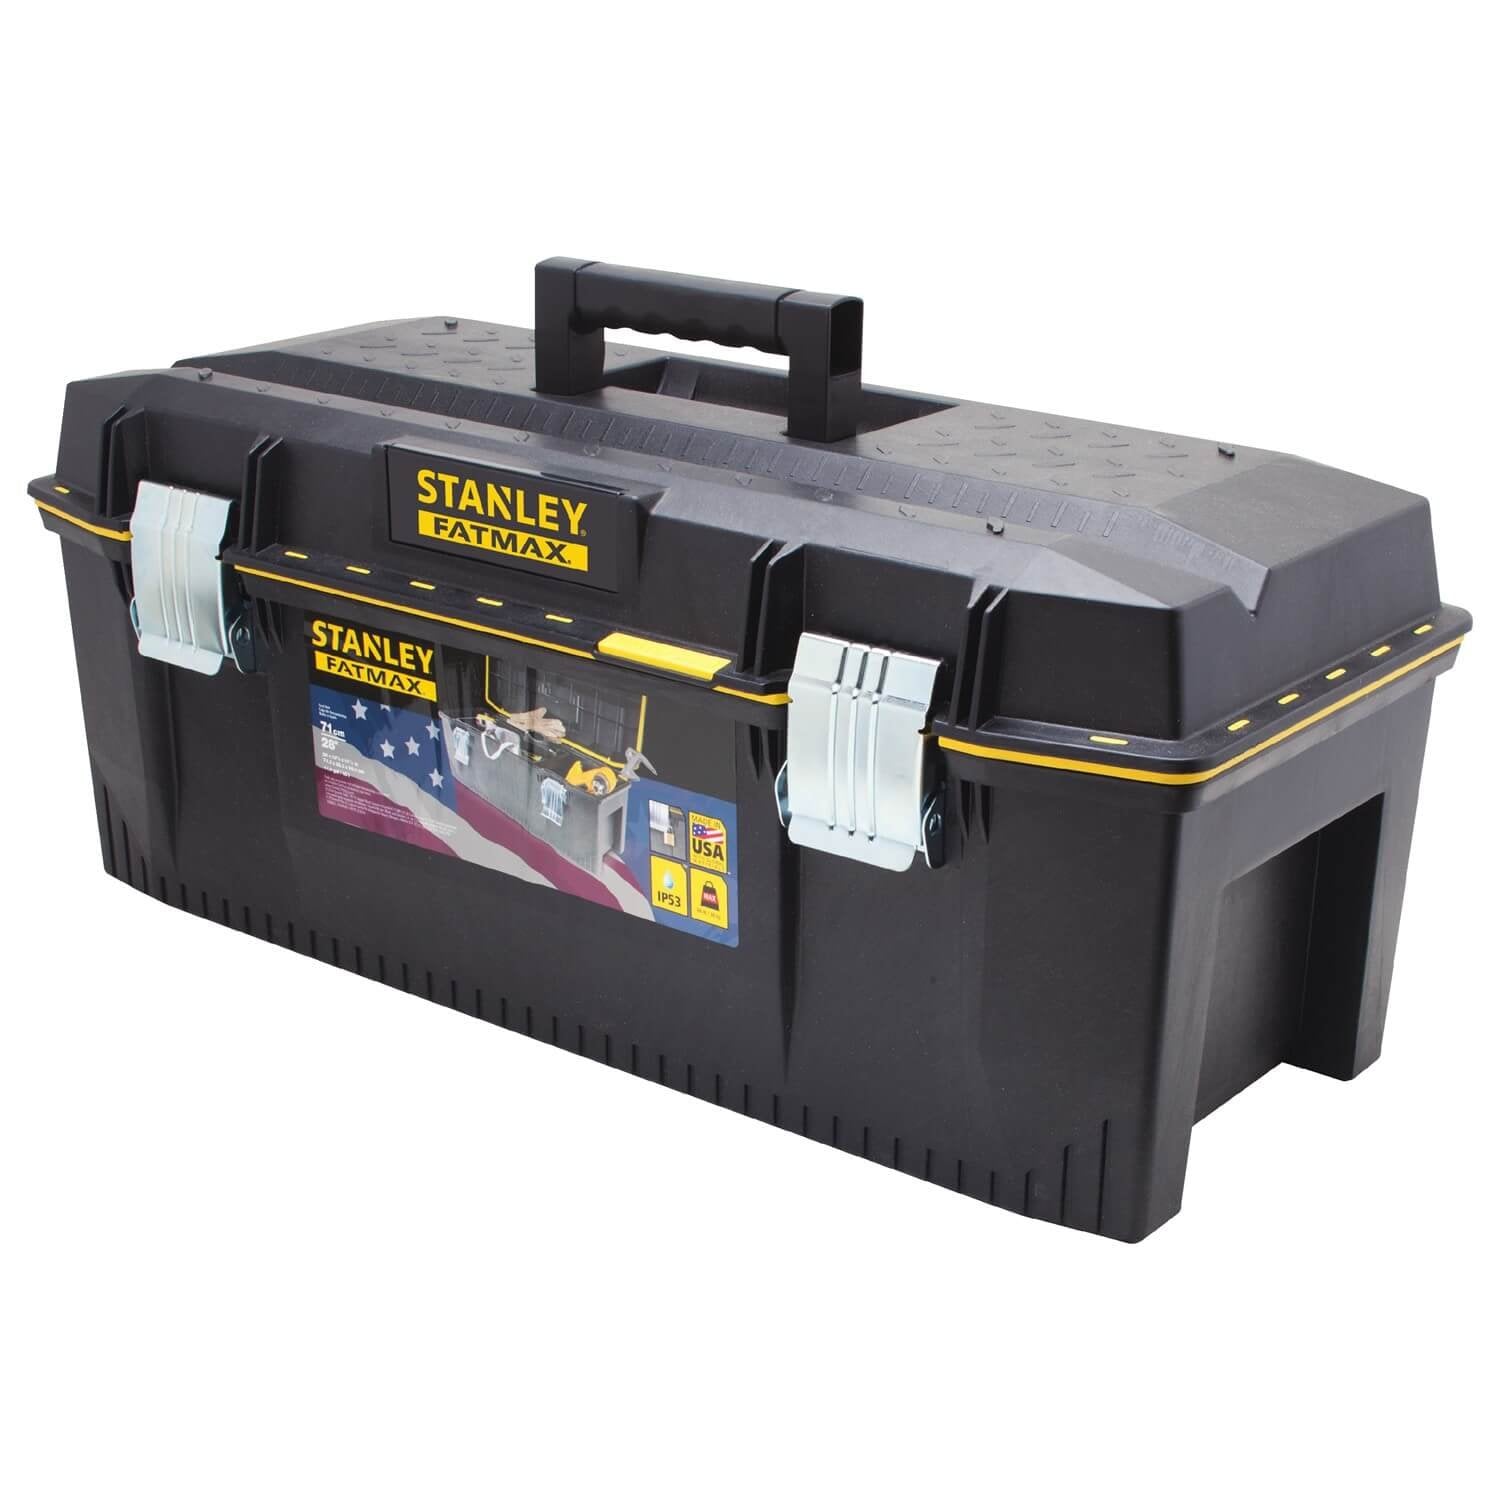 STANLEY 028001L 28-Inch Structural Foam Toolbox